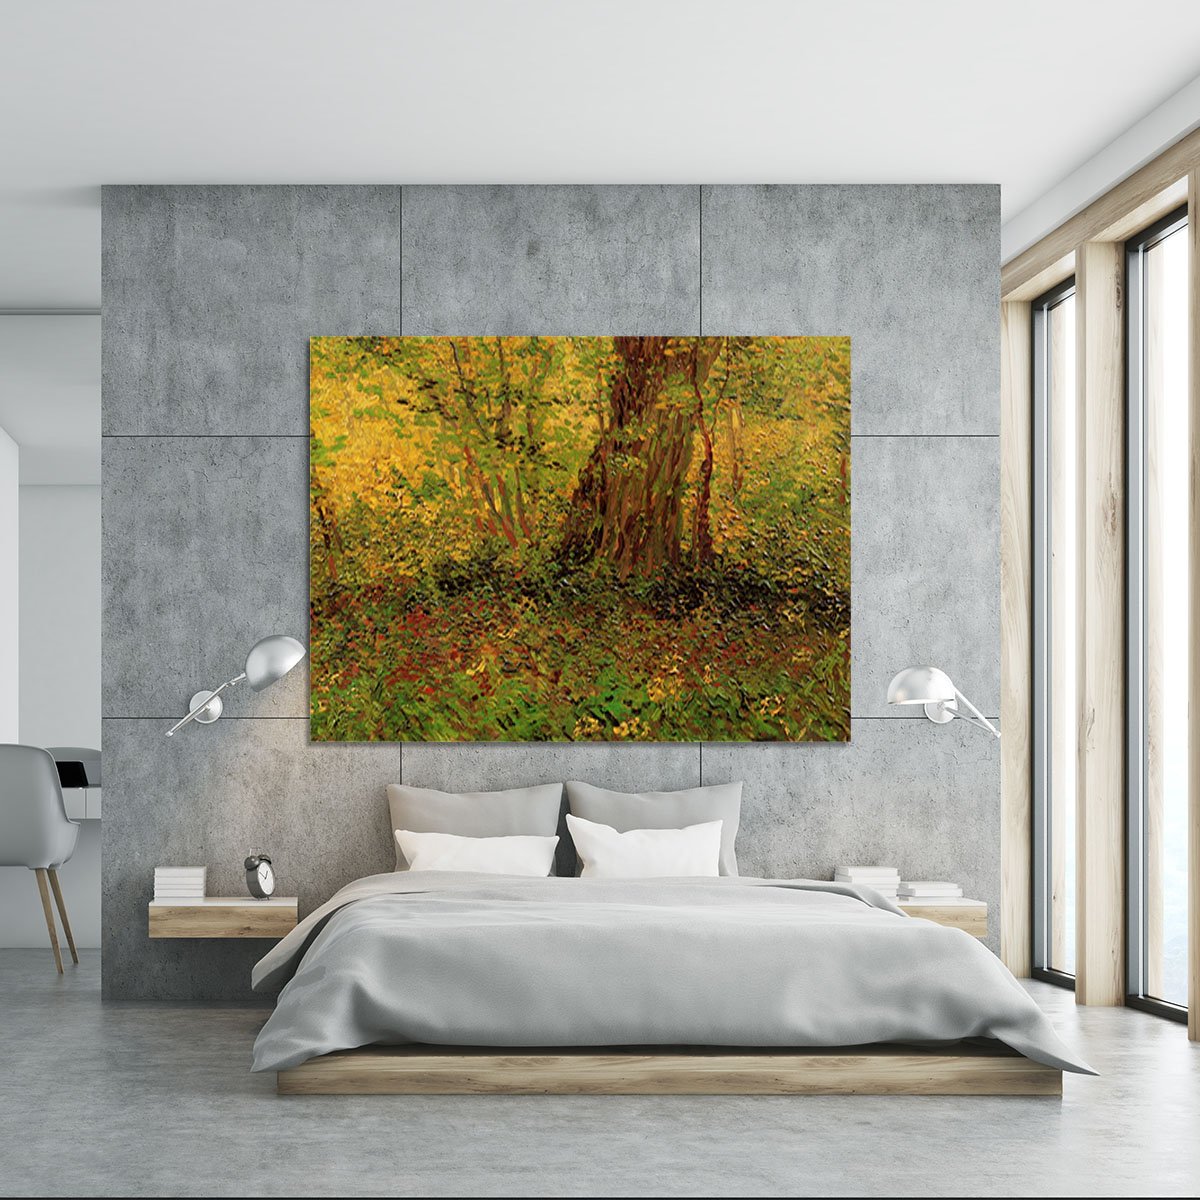 Undergrowth 2 by Van Gogh Canvas Print or Poster